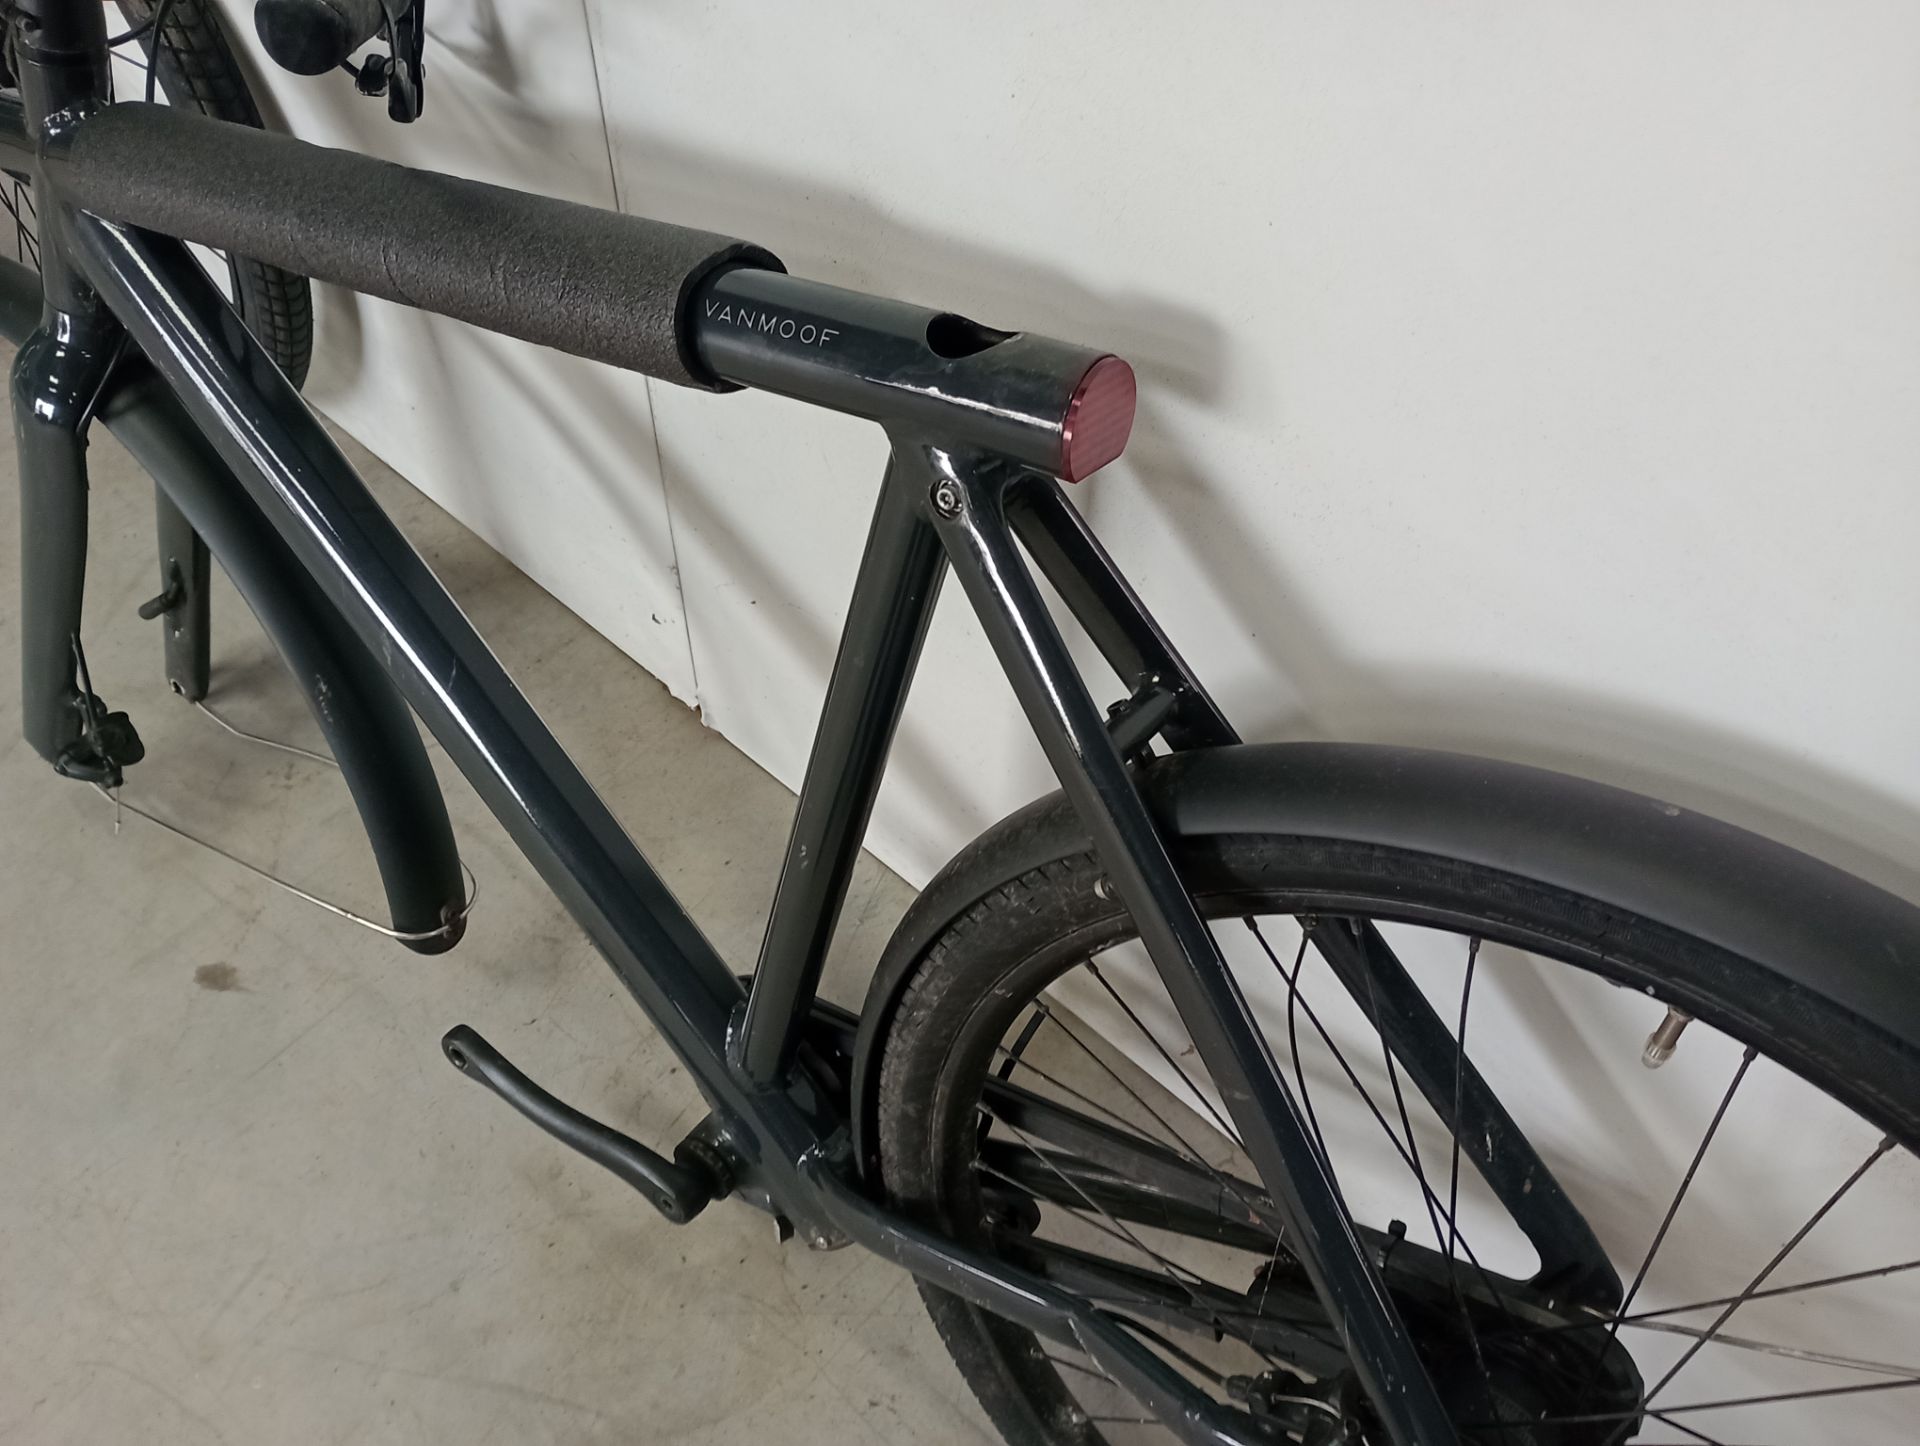 VanMoof S2 Electric Bike, Frame Number AST8802338 (NOT ROADWORTHY - FOR SPARES ONLY) (No codes - Image 2 of 3